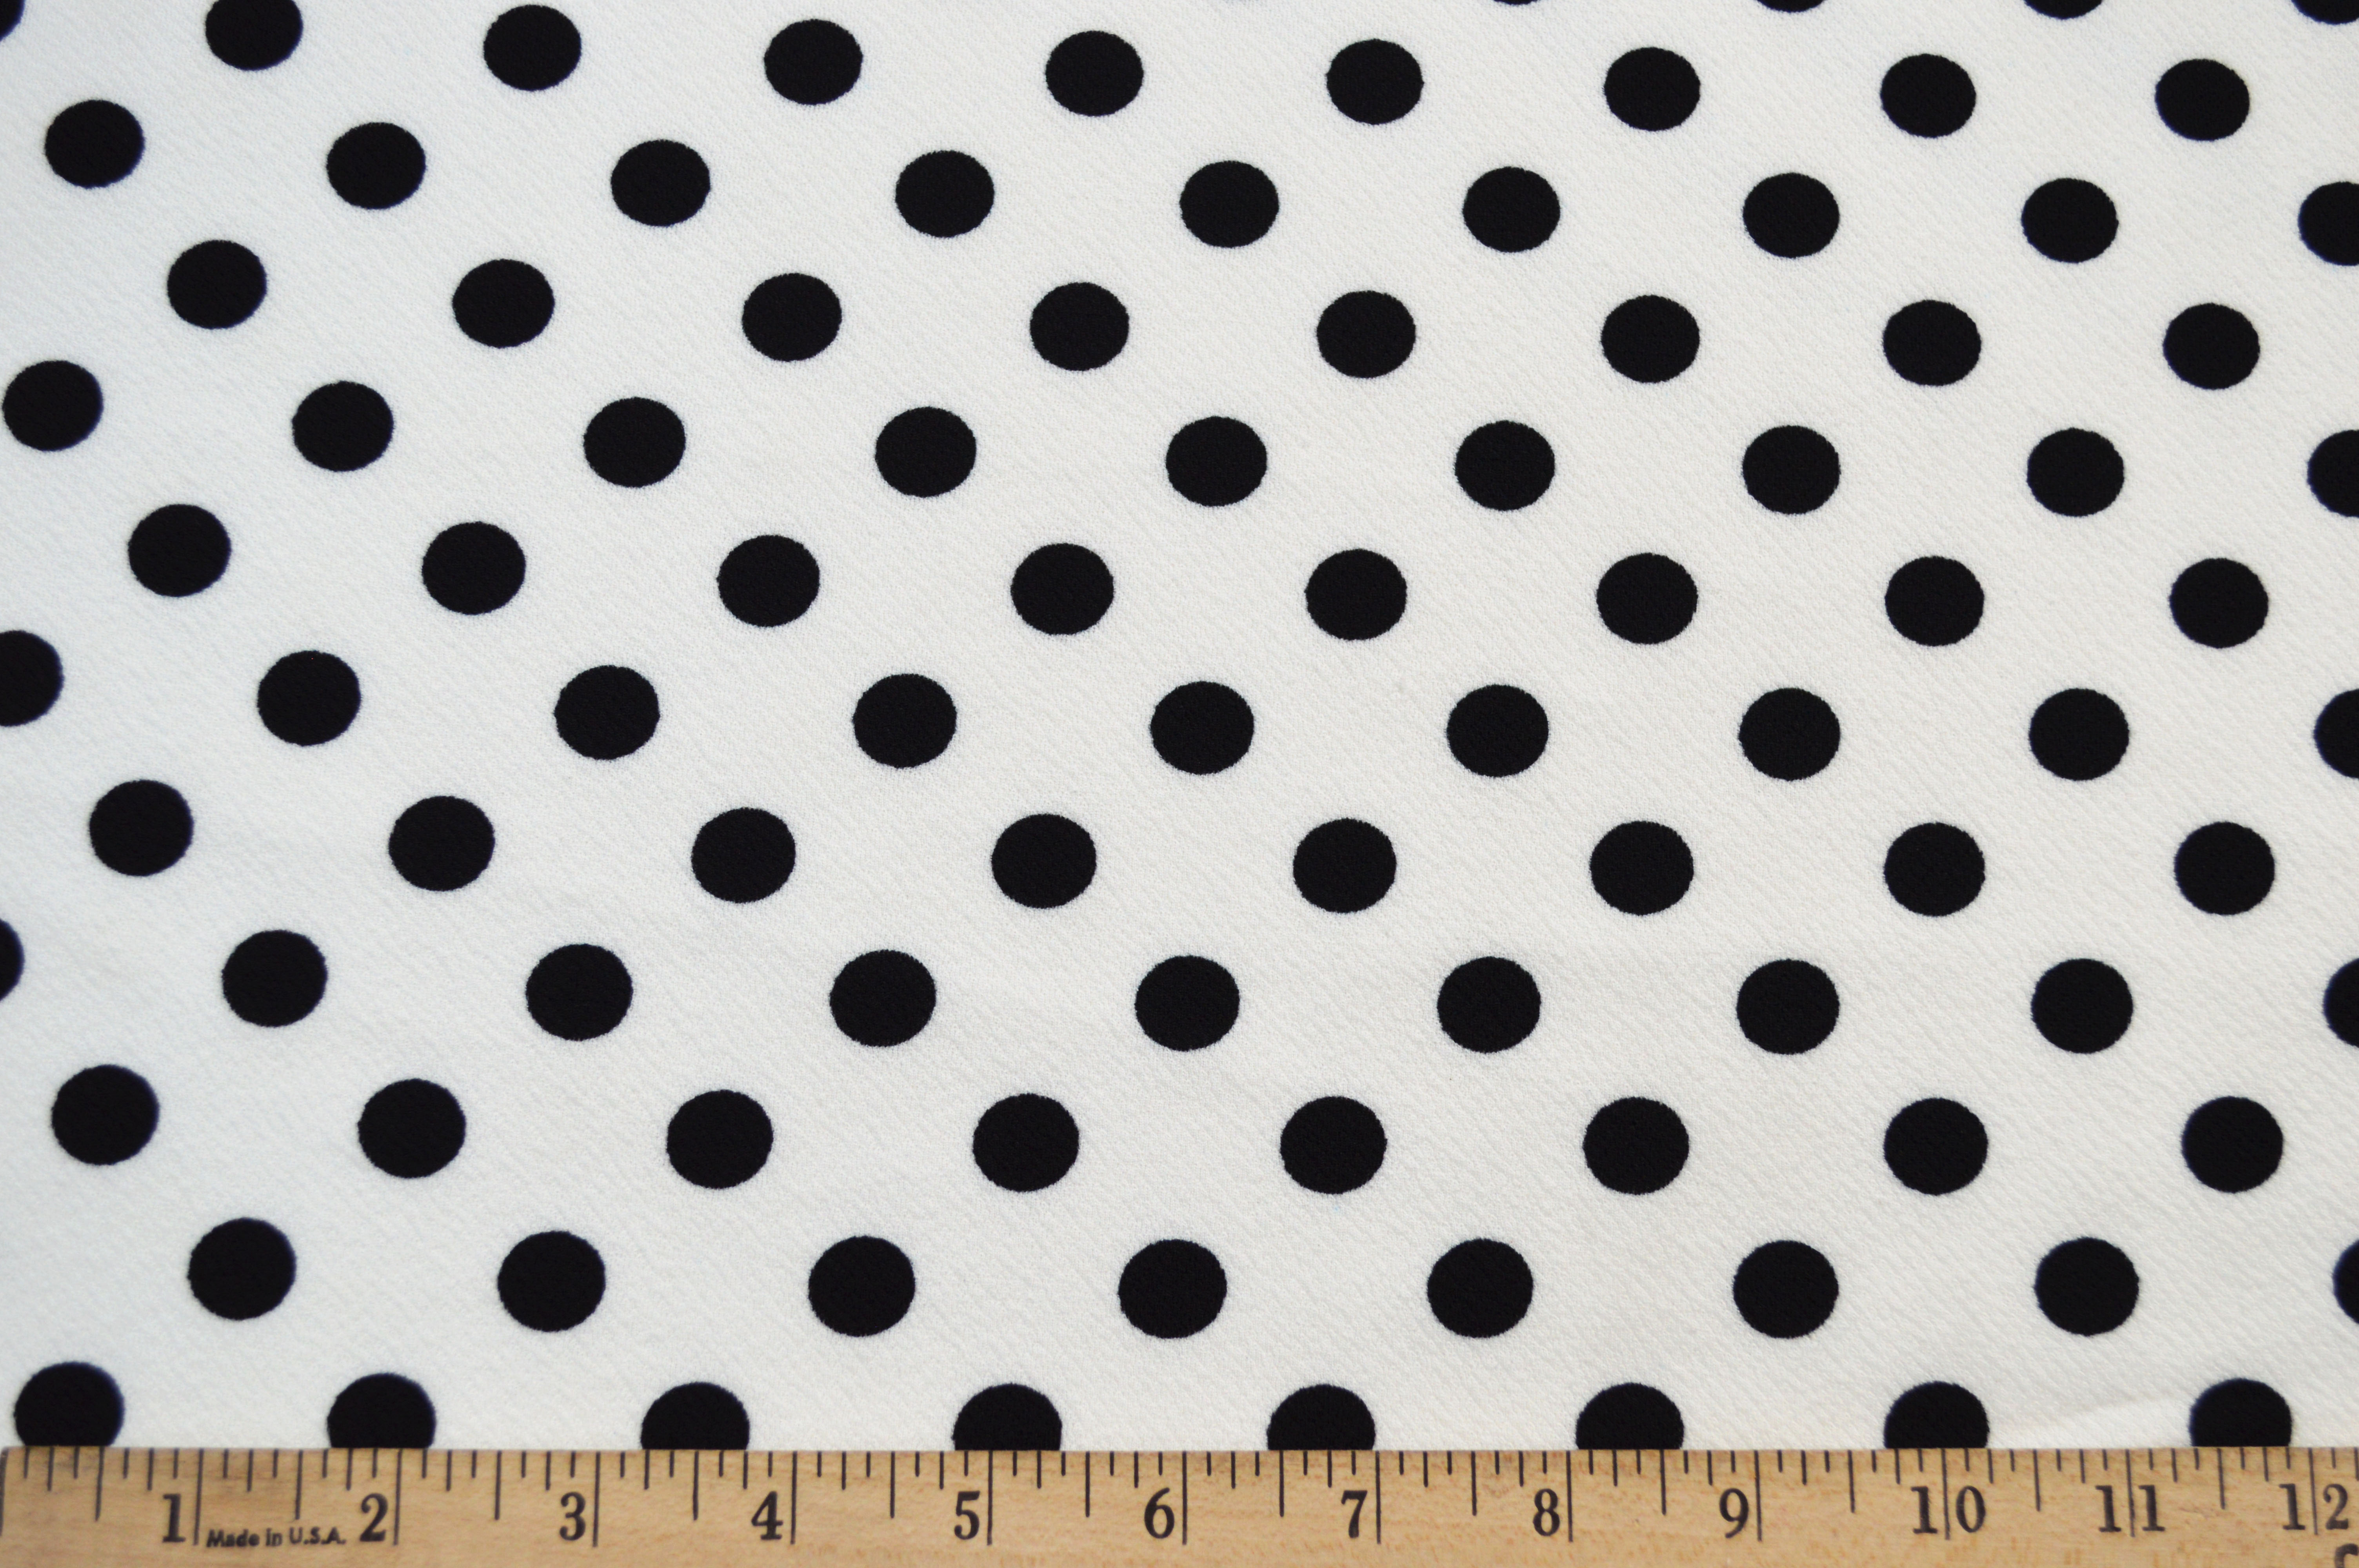 Liverpool Knit Black Dots on White 58 Fabric by the Yard